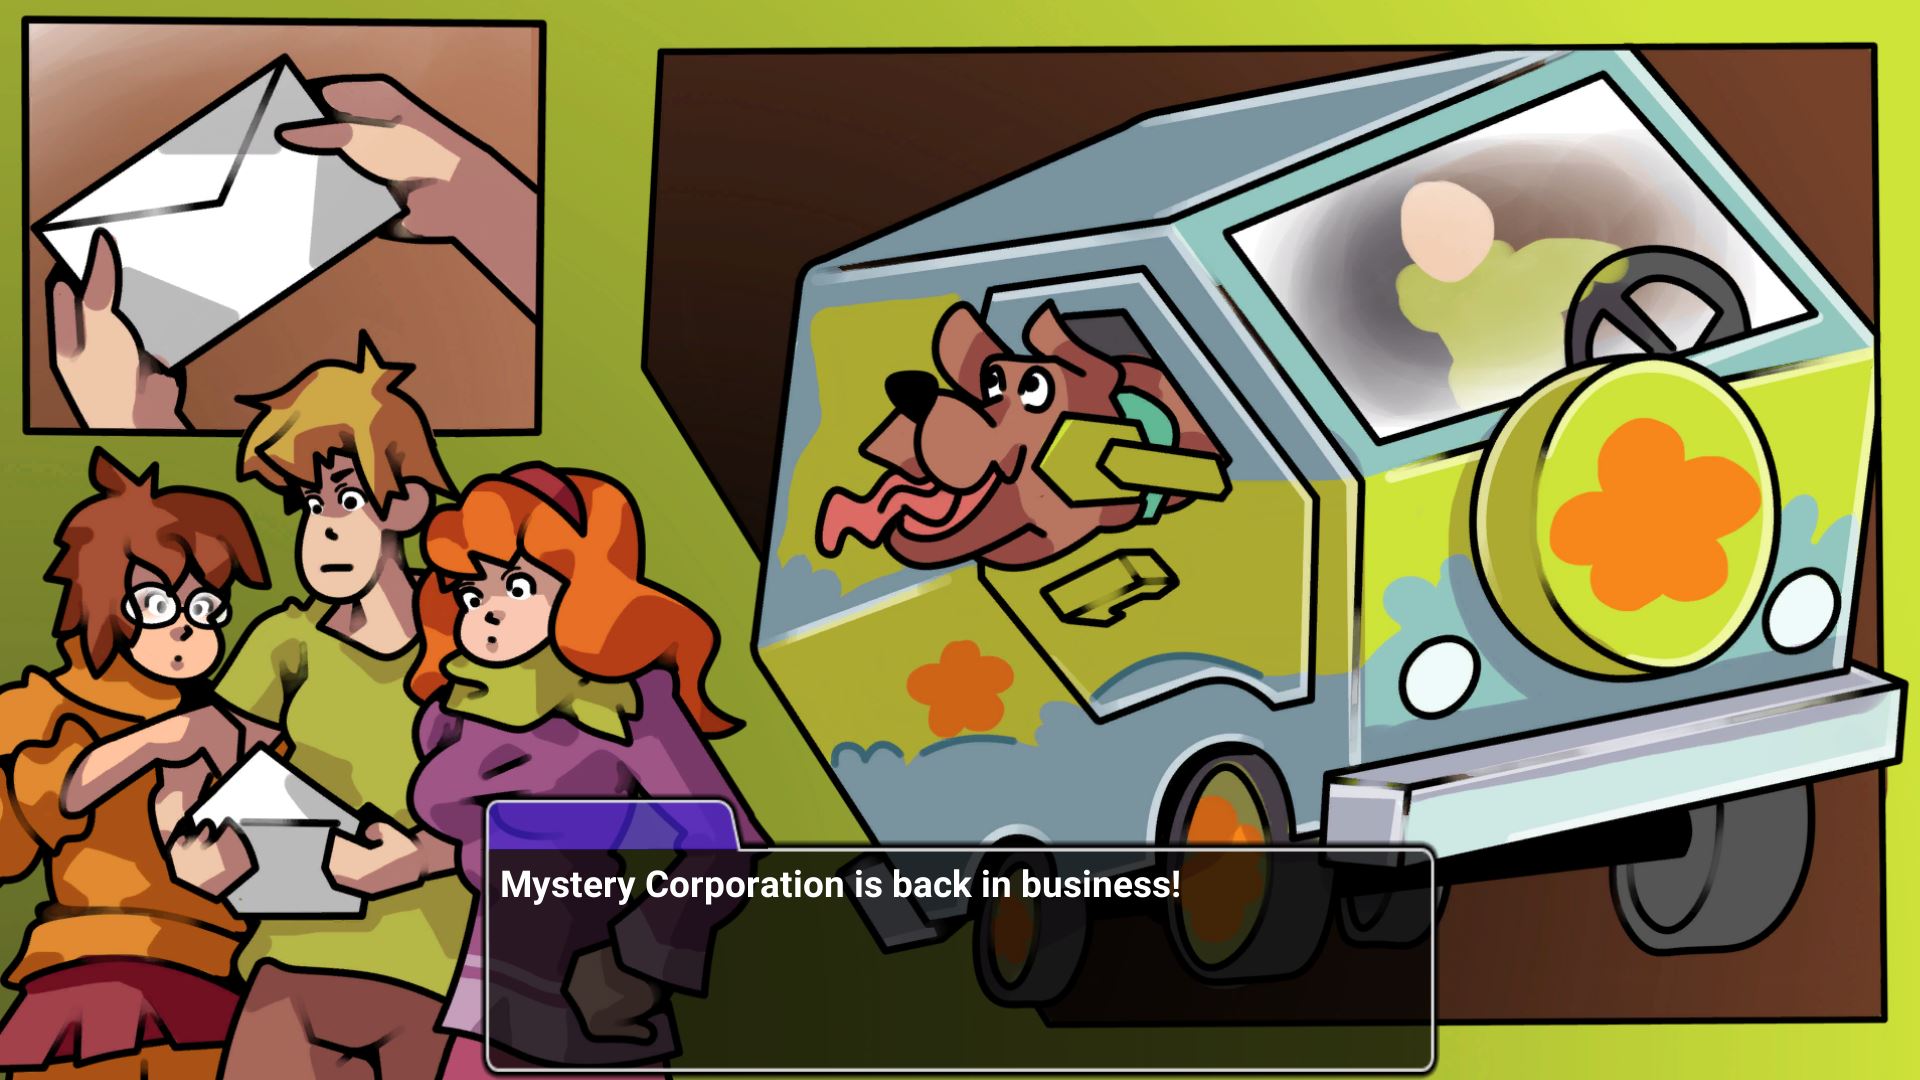 Whats New Scooby Doo Porn - Unity] Scooby-Doo! A Depraved Investigation - v2 by The Dark Forest 18+ Adult  xxx Porn Game Download